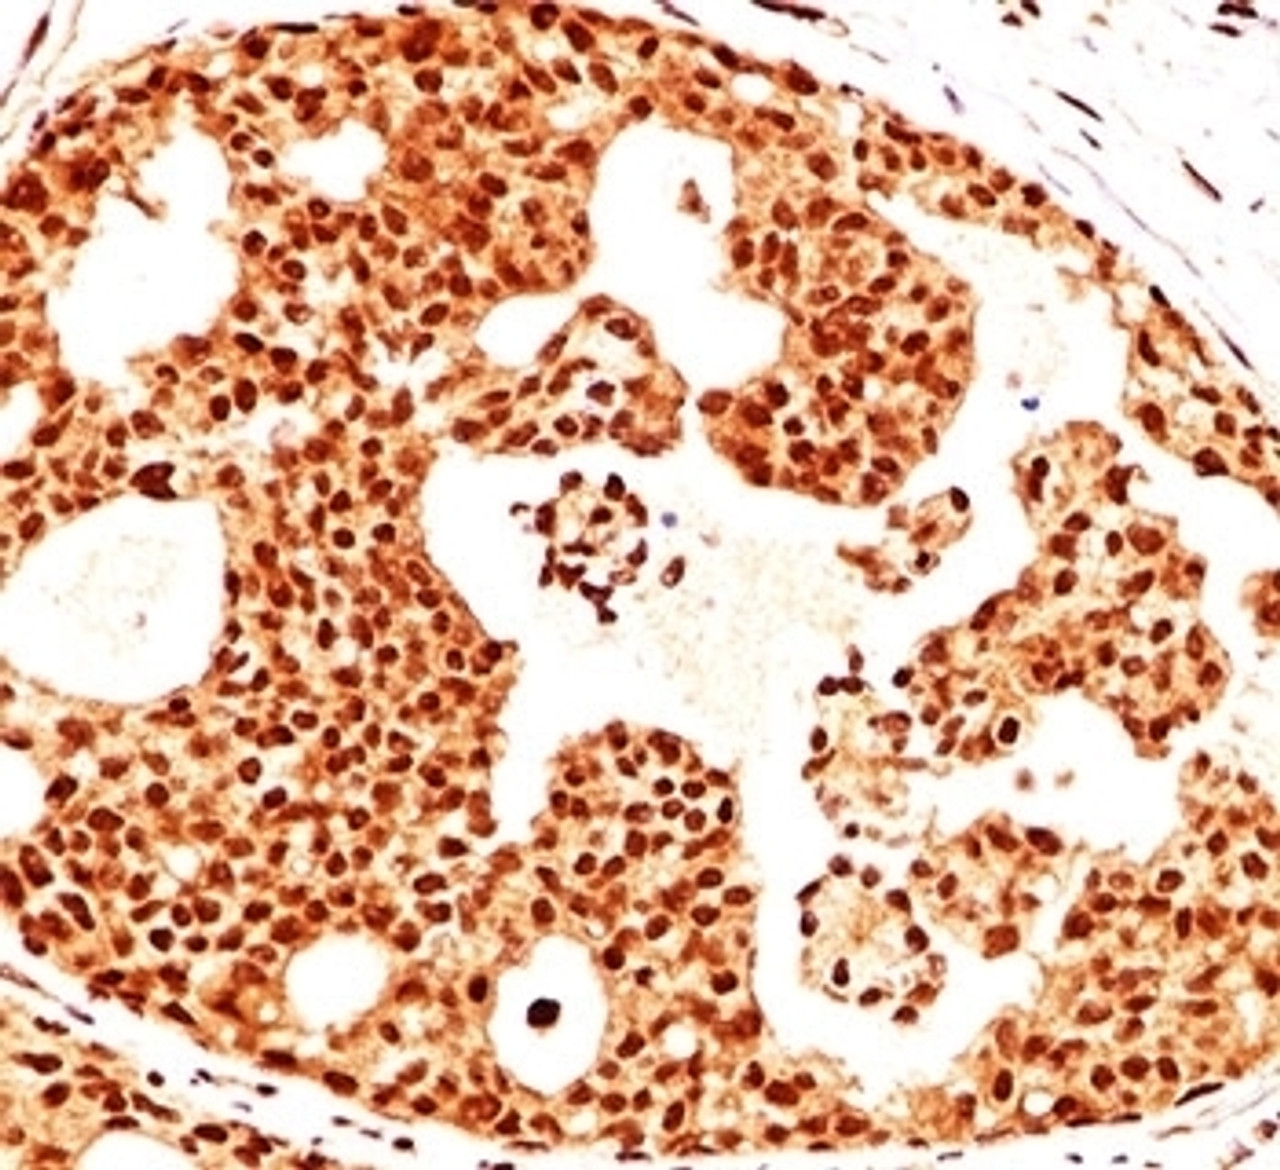 IHC testing of breast cancer stained with Estrogen Receptor beta antibody (ERb455) .